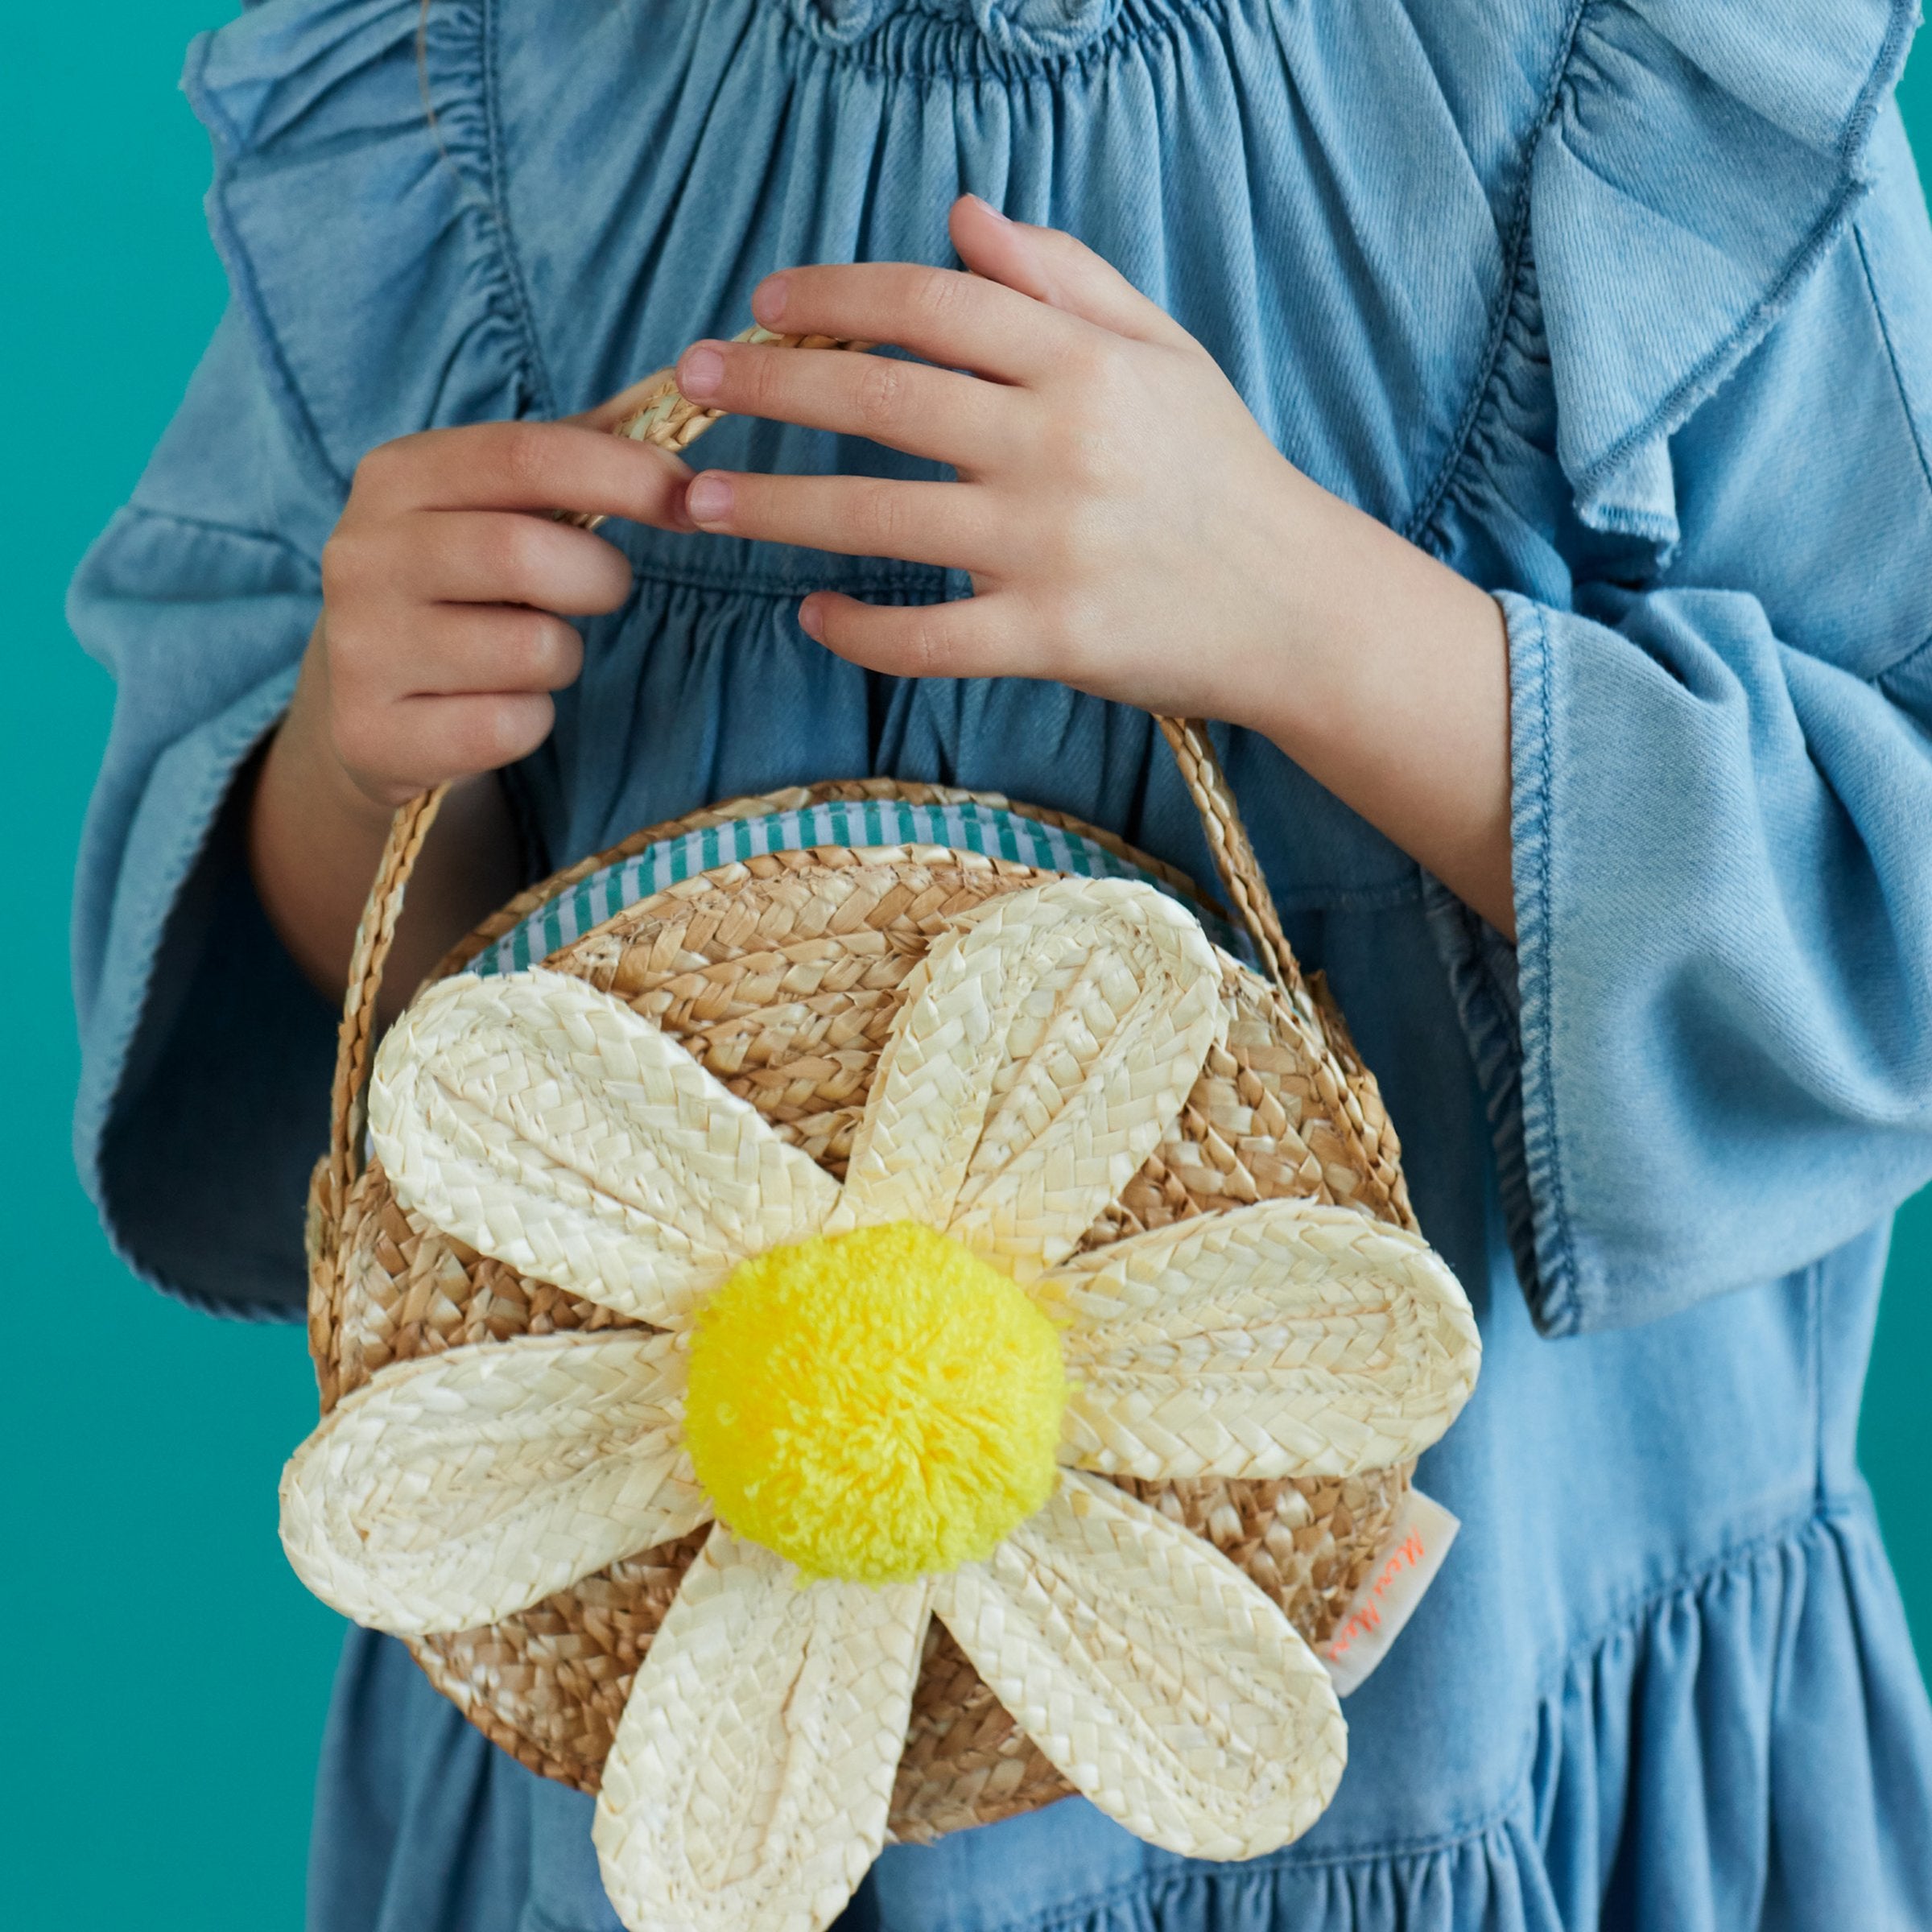 This sensational straw kids bag has a raffia daisy with a yellow pompom in the center.